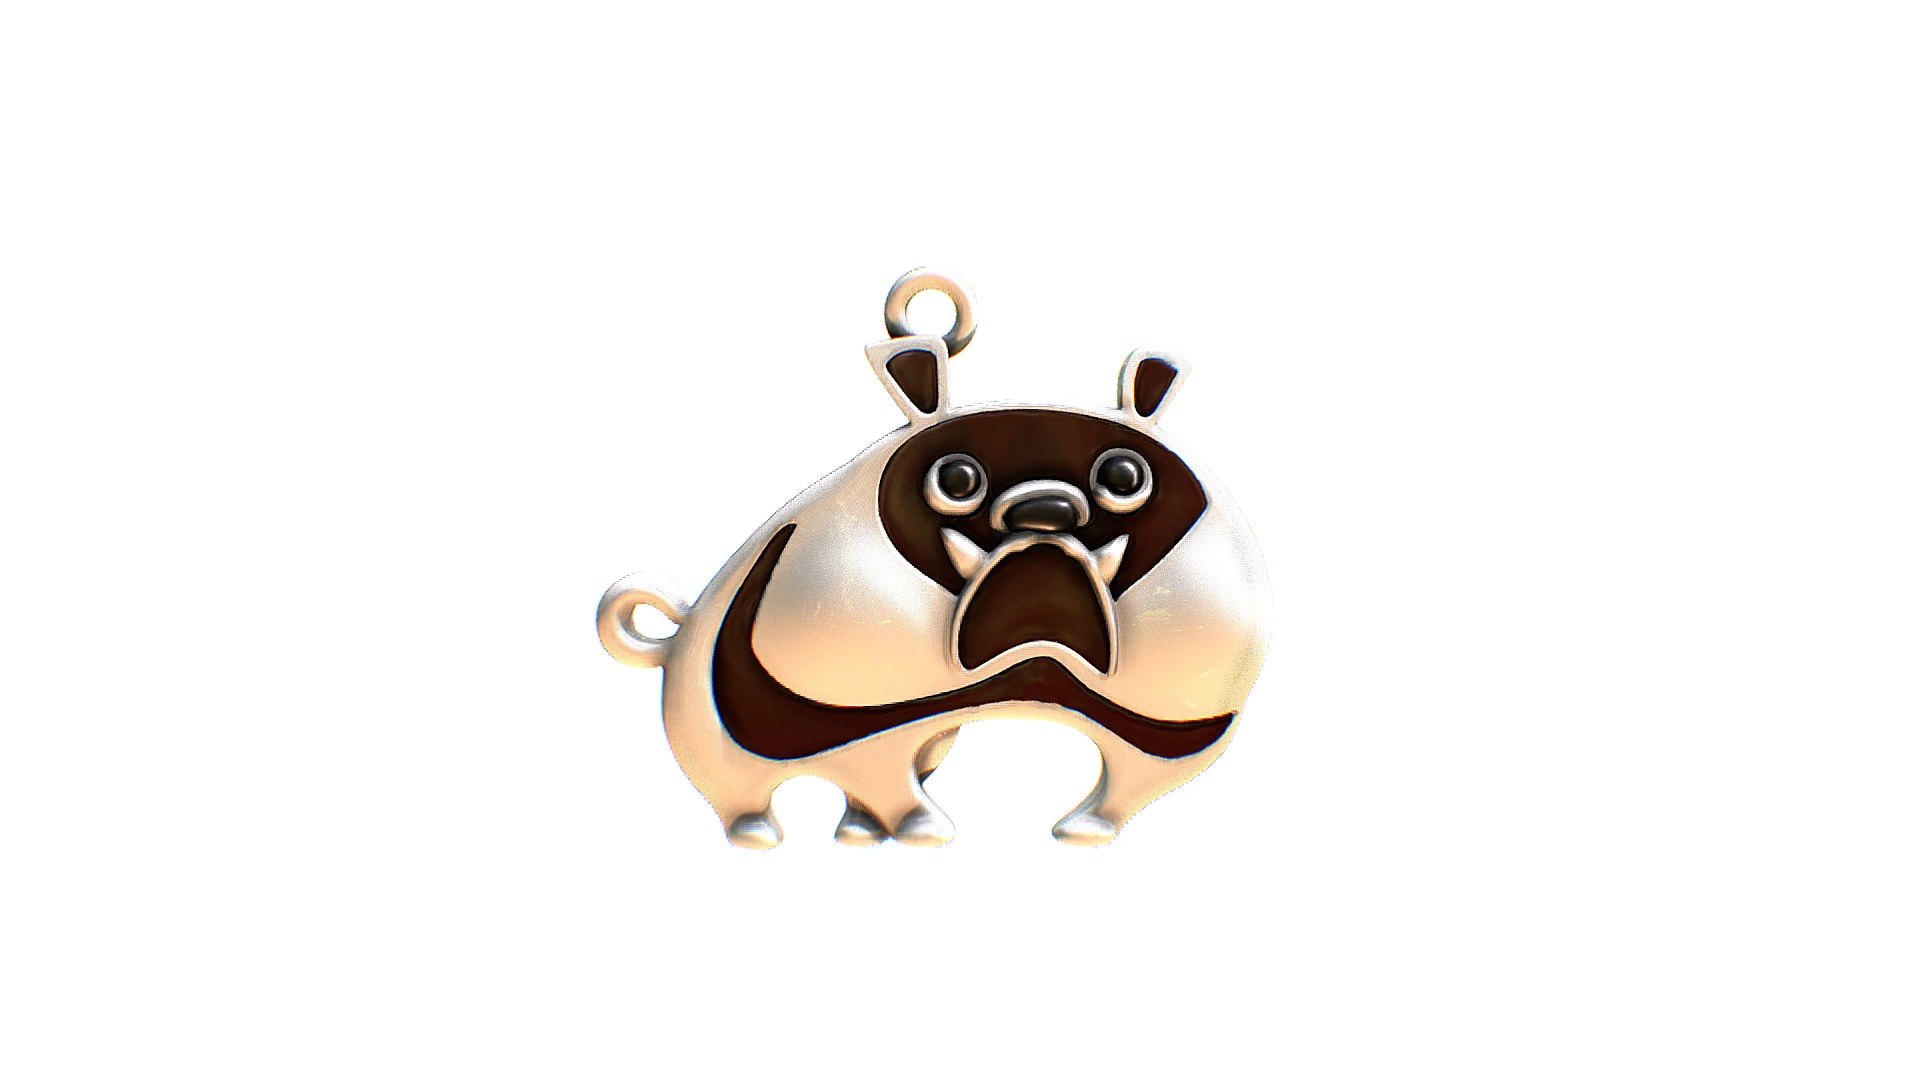 3D model Confused Dog - This is a 3D model of the Confused Dog. The 3D model is about a small brown dog toy.